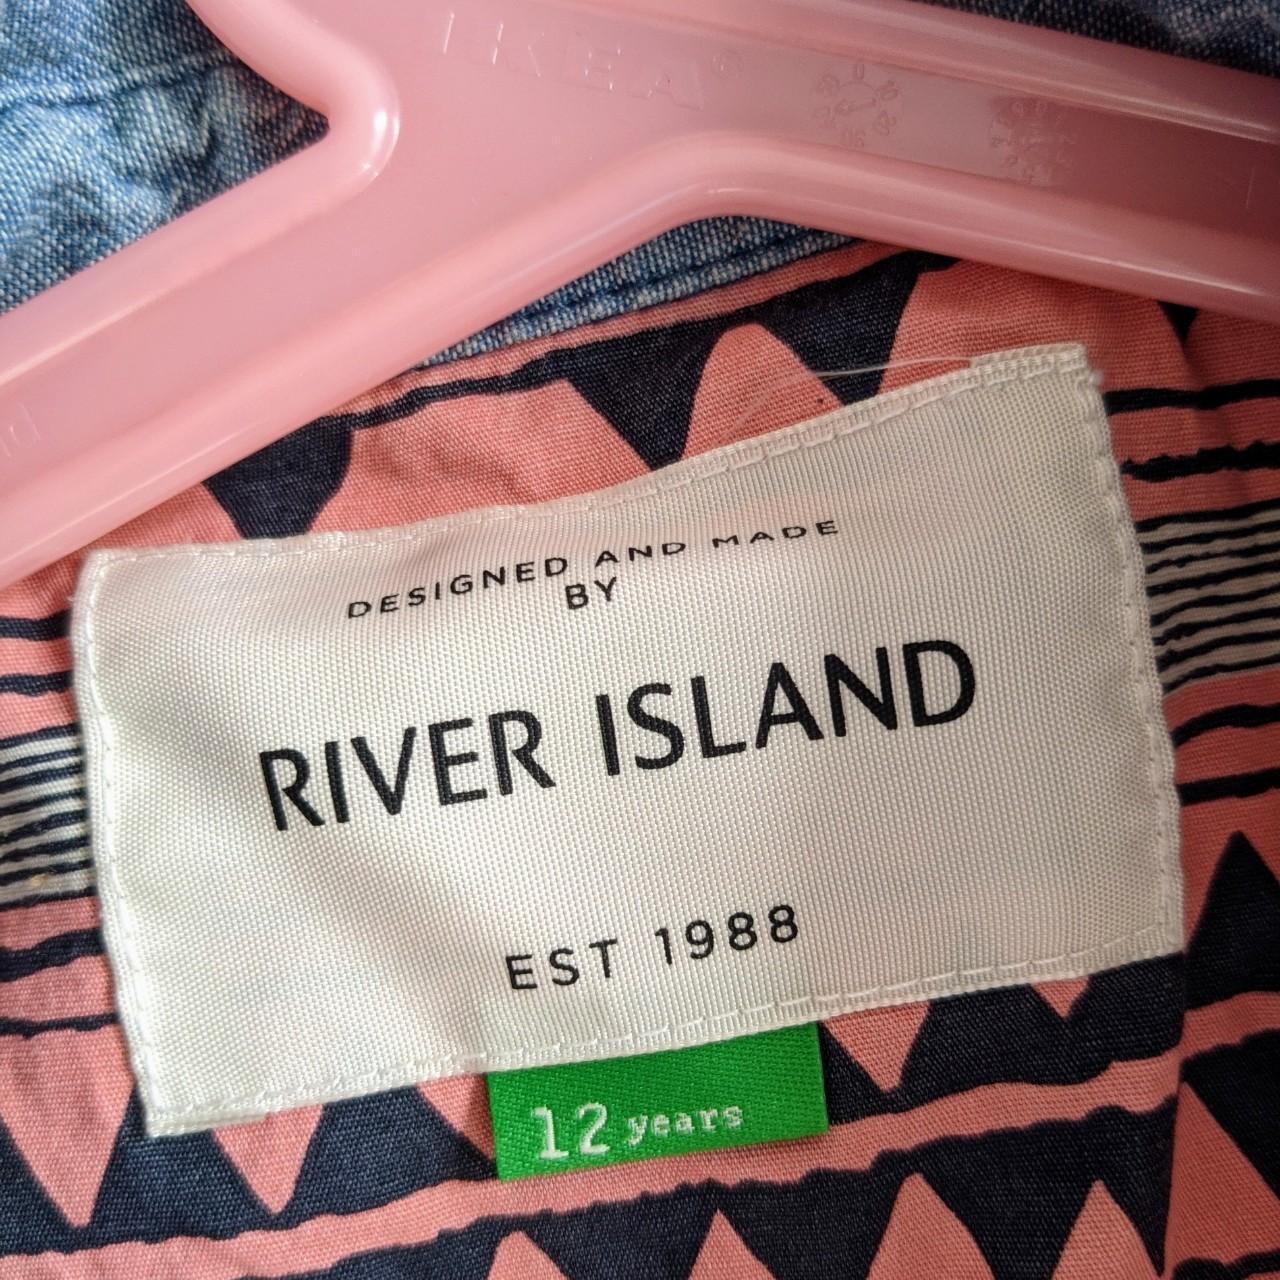 River Island aged 12 years shirt, good fit for small... - Depop